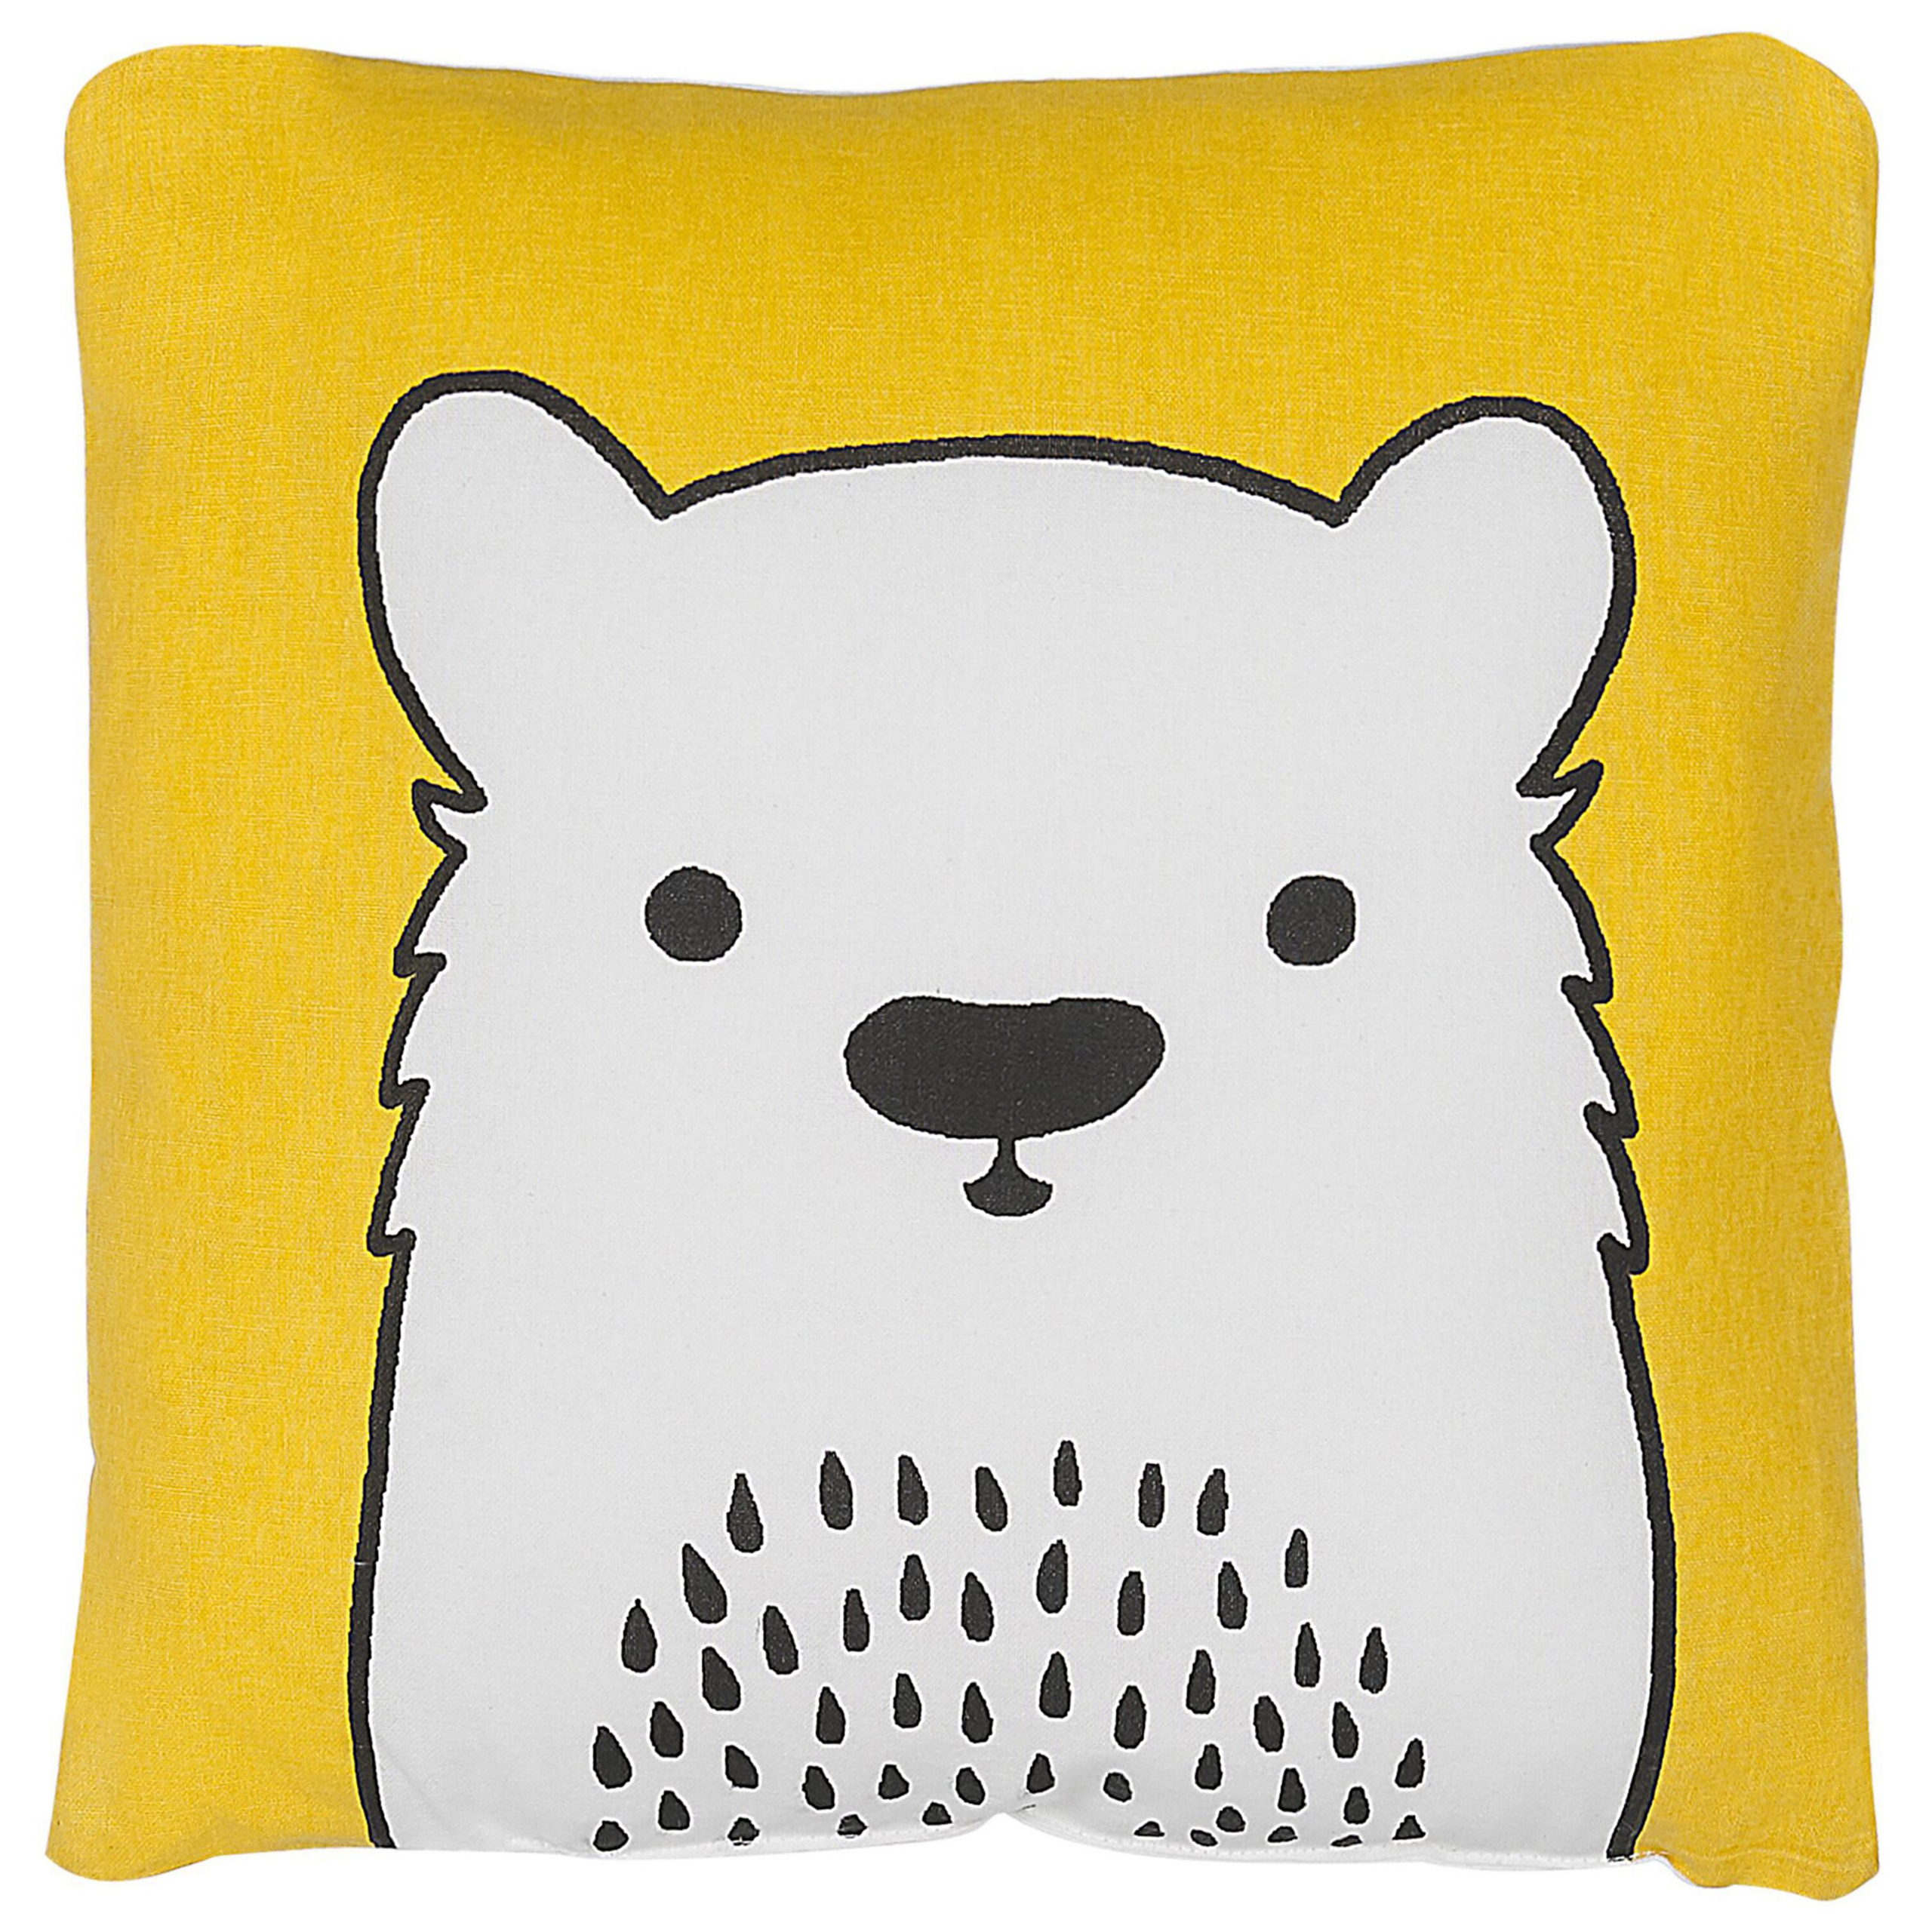 Beliani Kids Cushion Yellow Fabric Bear Image Pillow with Filling Soft Childrens' Toy